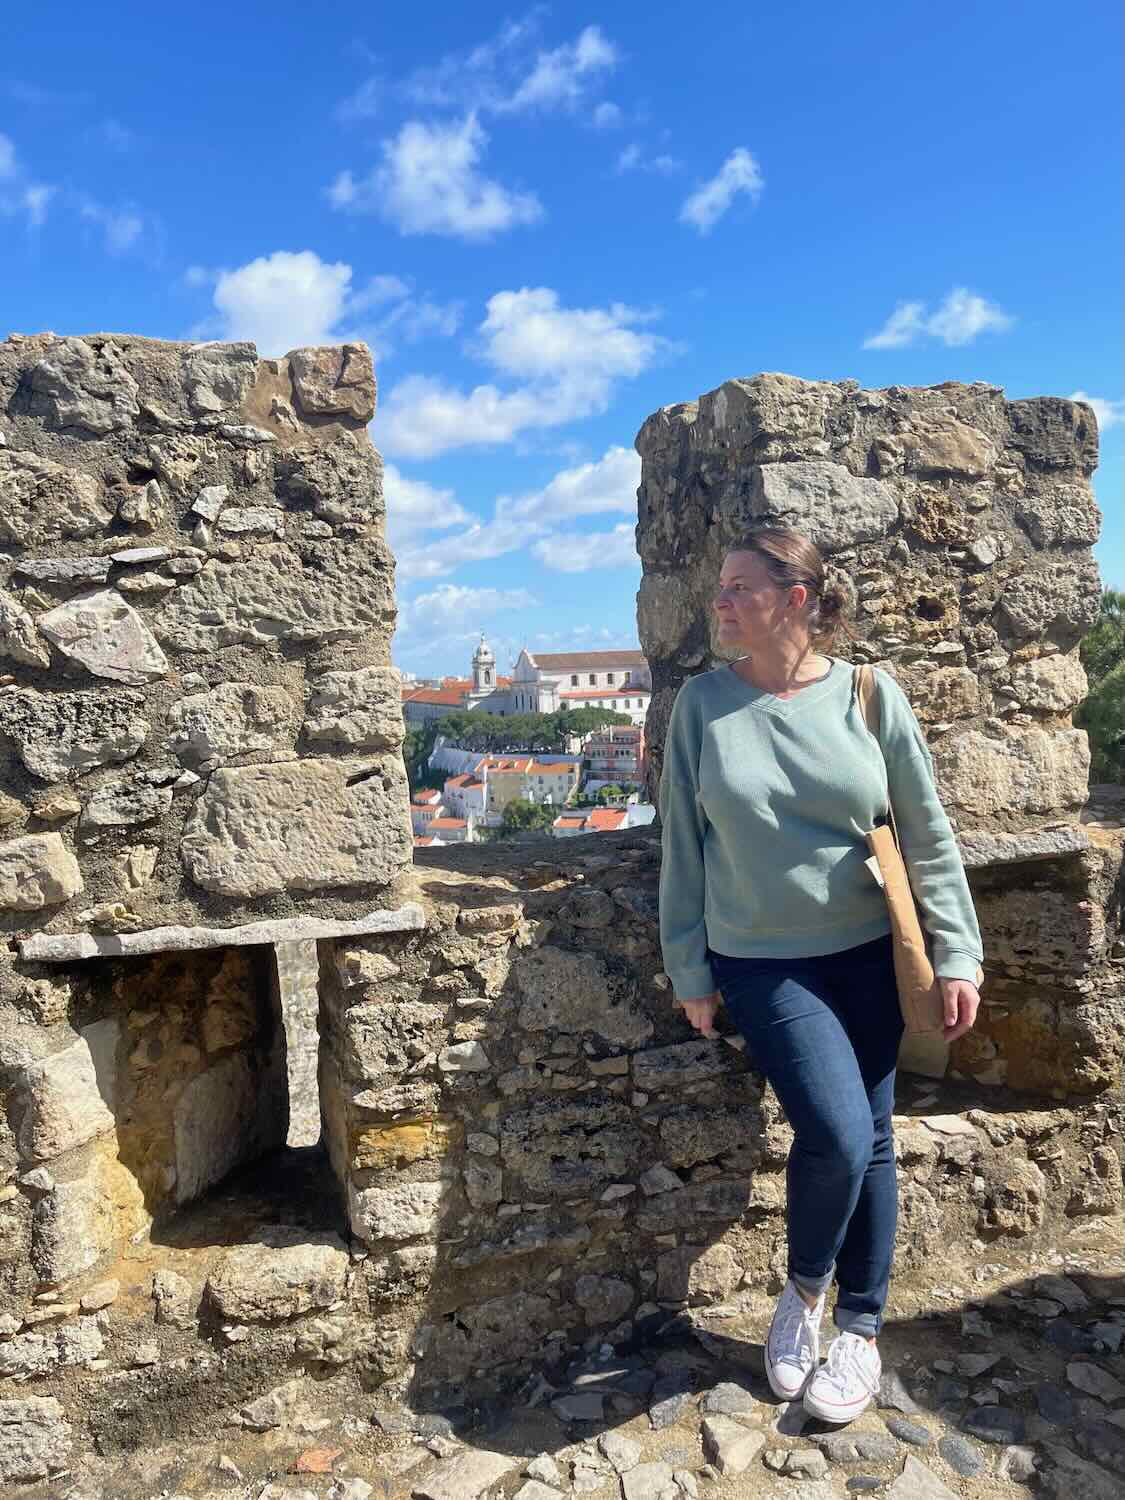 A woman stands contemplatively between ancient stone battlements at a castle in Lisbon, with the cityscape unfurling in the background under a bright blue sky.